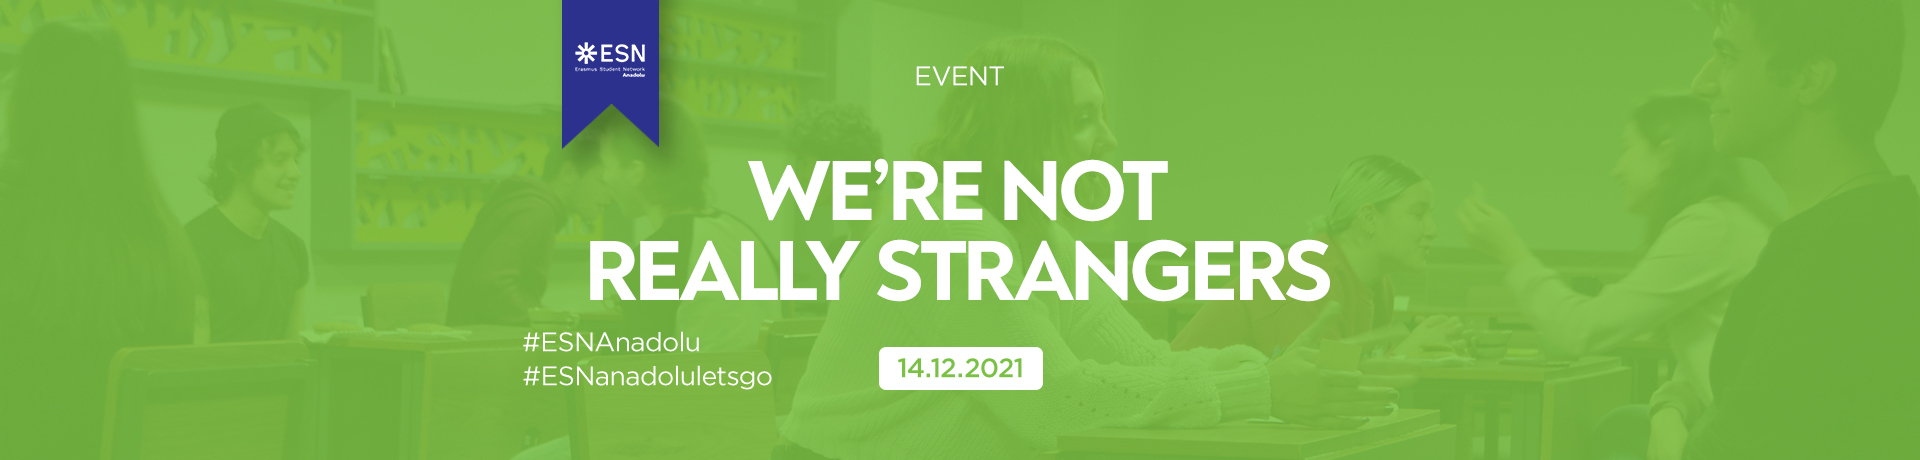 Thumbnail for "We're not really strangers" event of ESN Anadolu